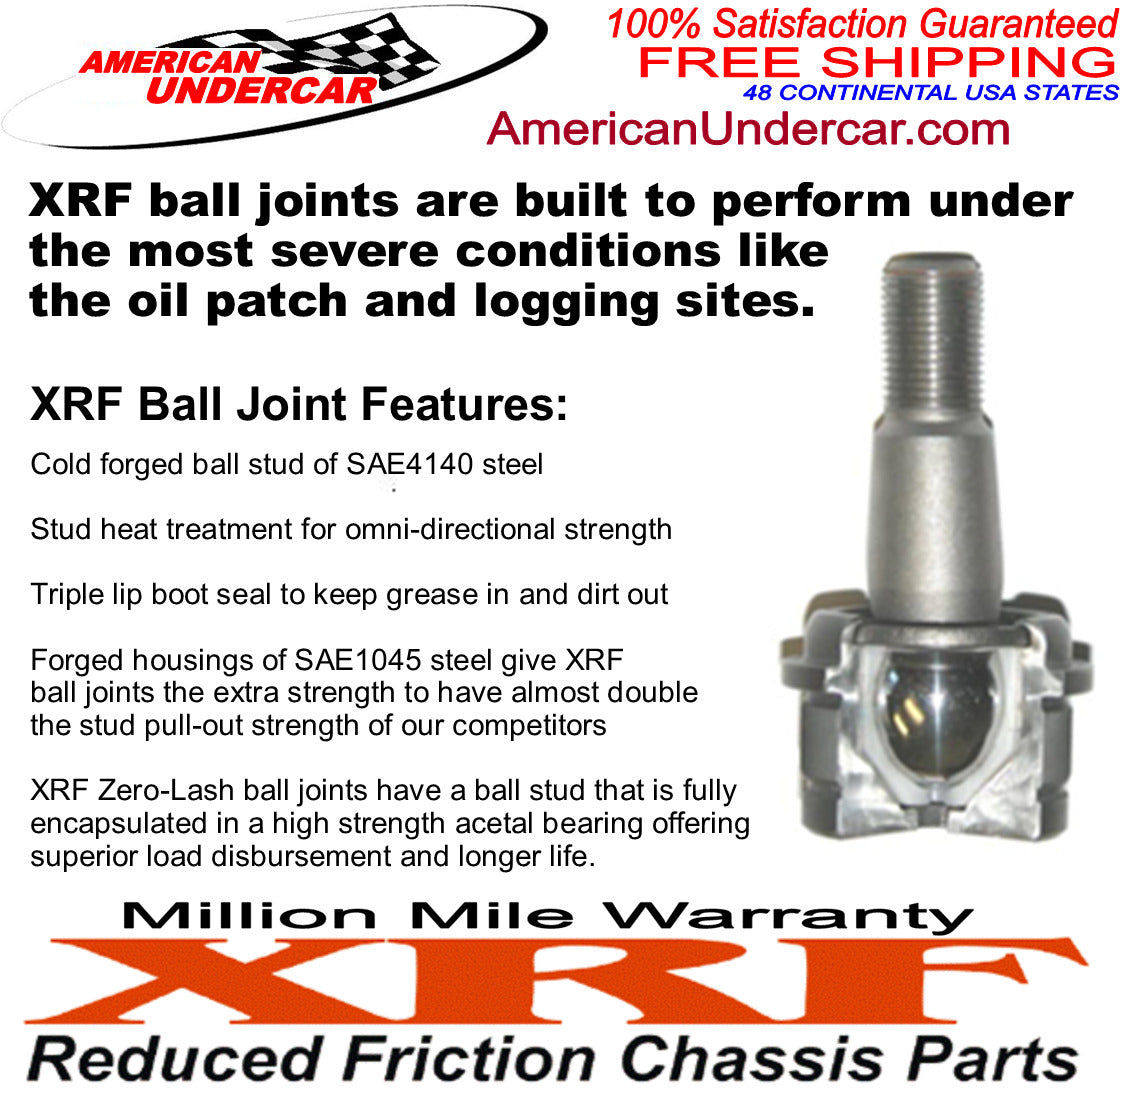 XRF Ford F250 Super Duty Ball Joint Steering and Suspension Kit 2011 - 2016 4x4